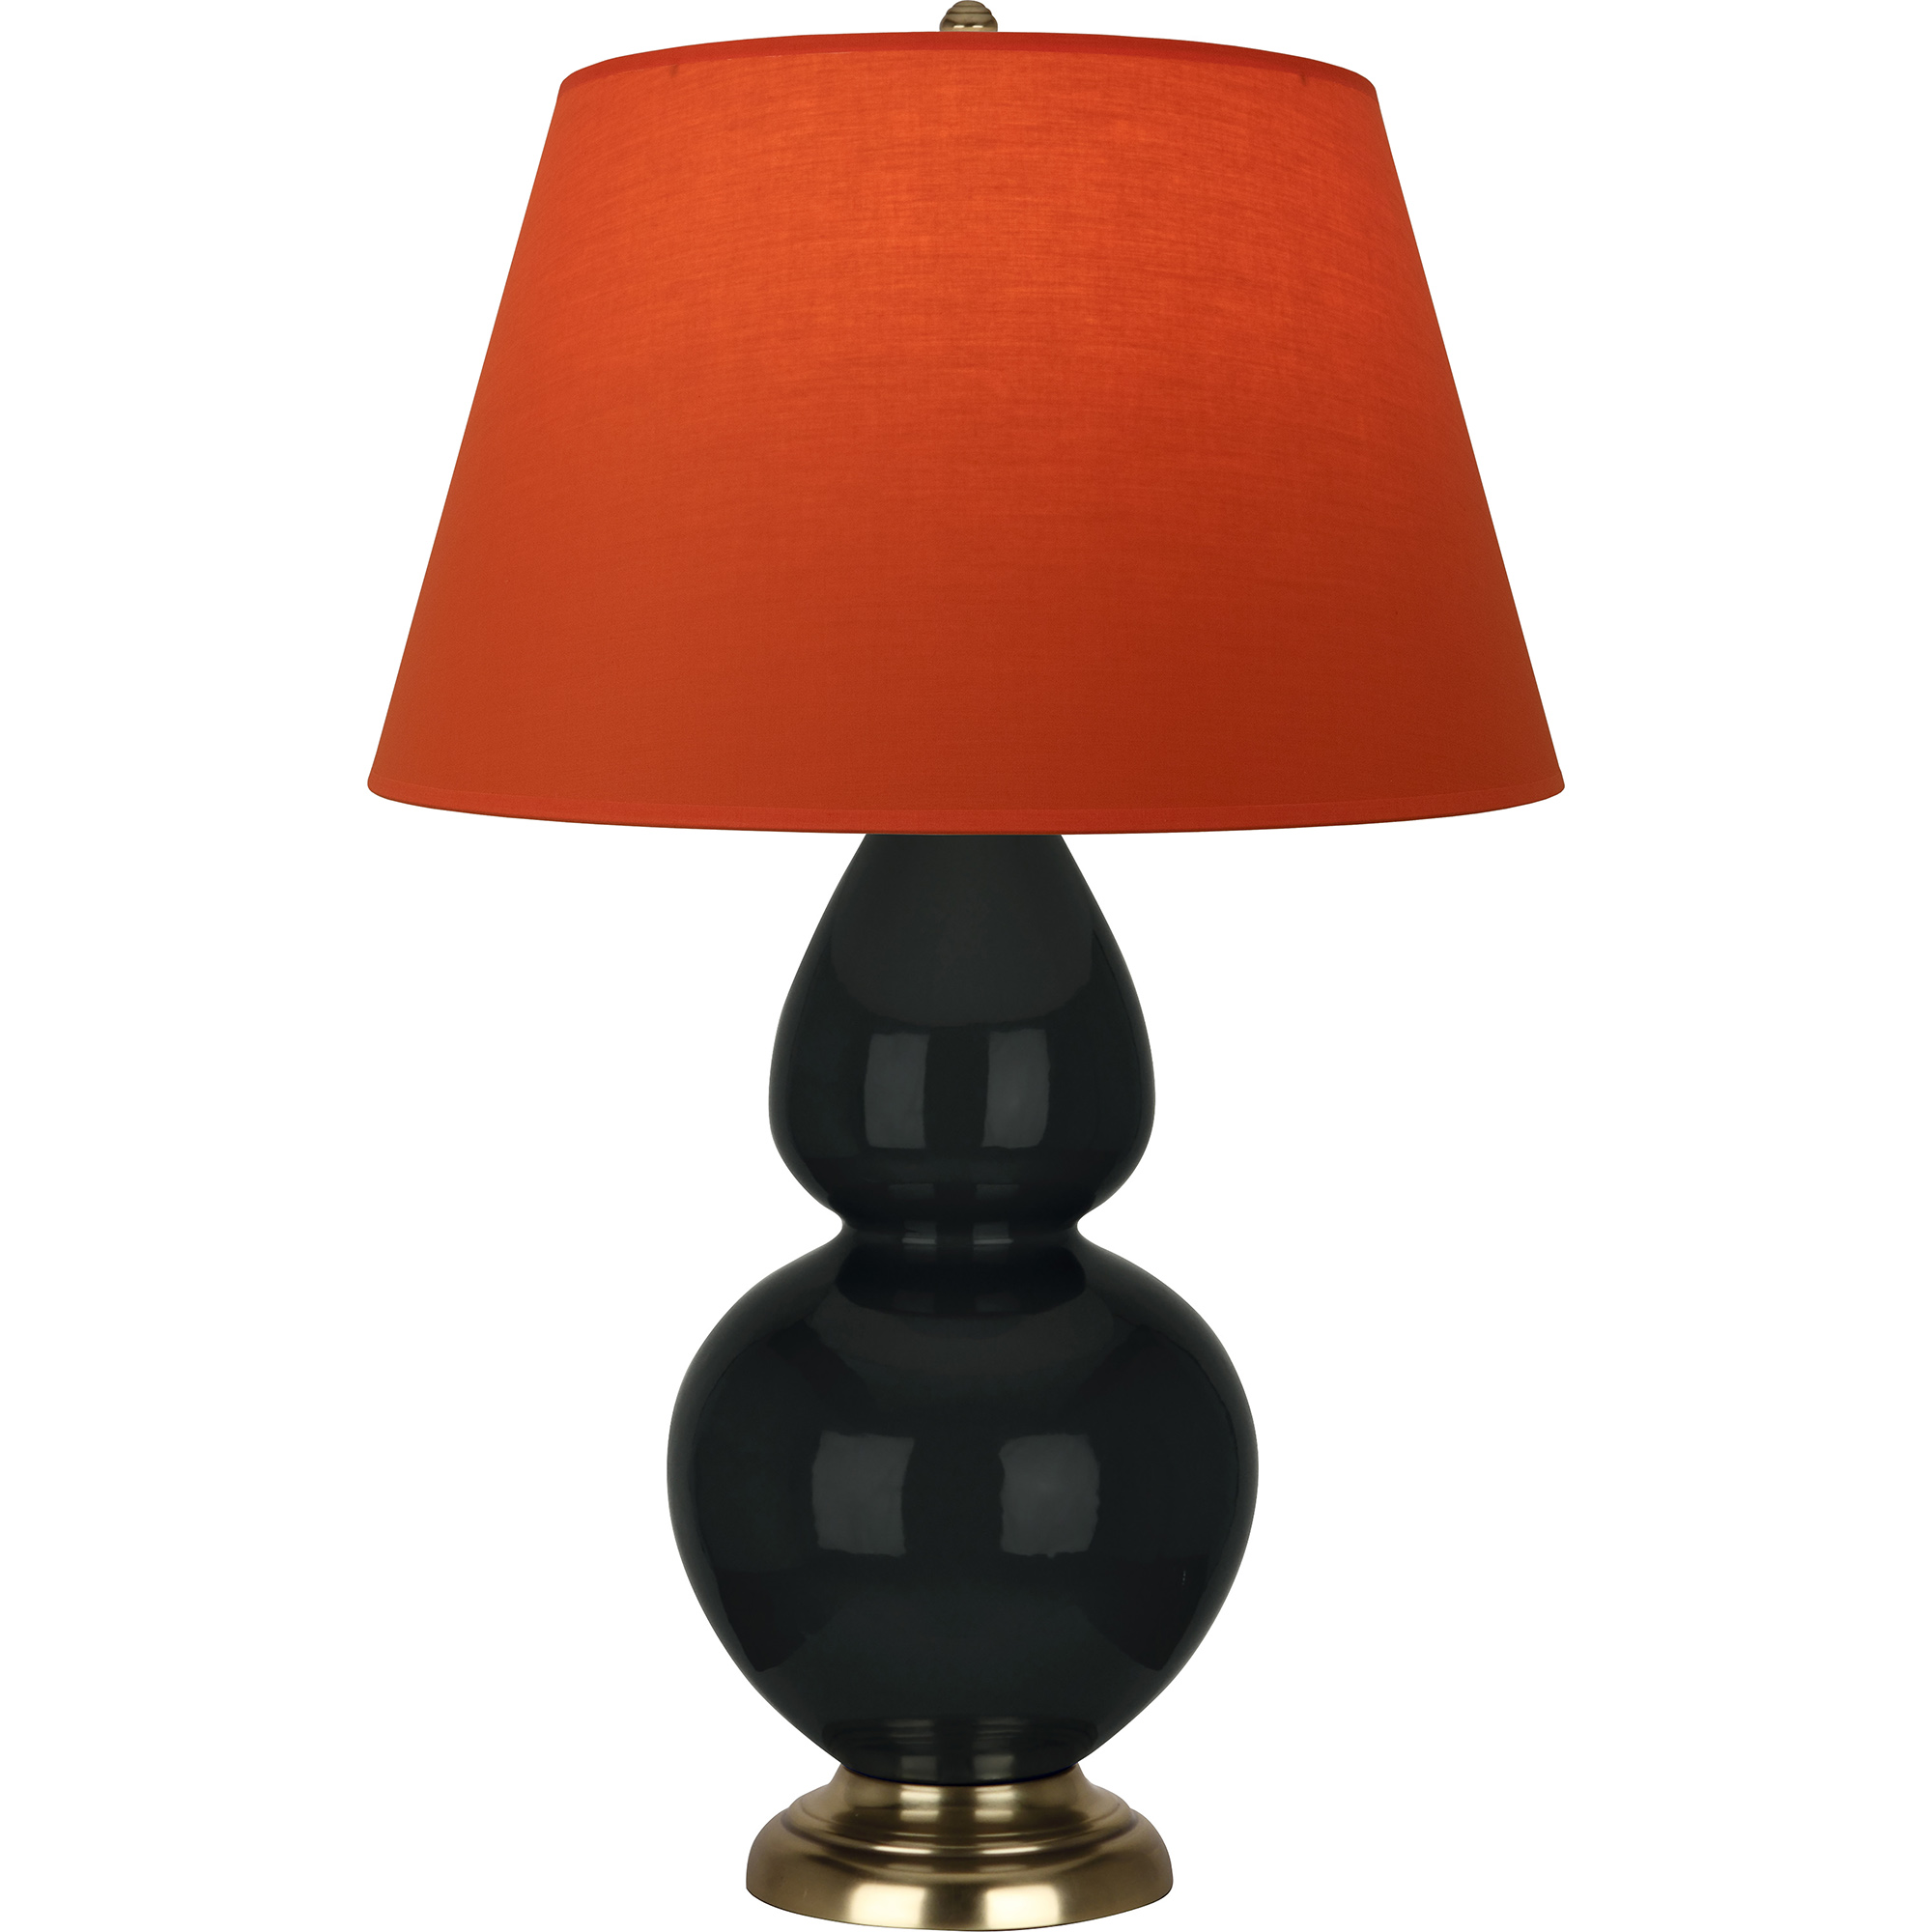 Double Gourd Table Lamp Style #OS20T